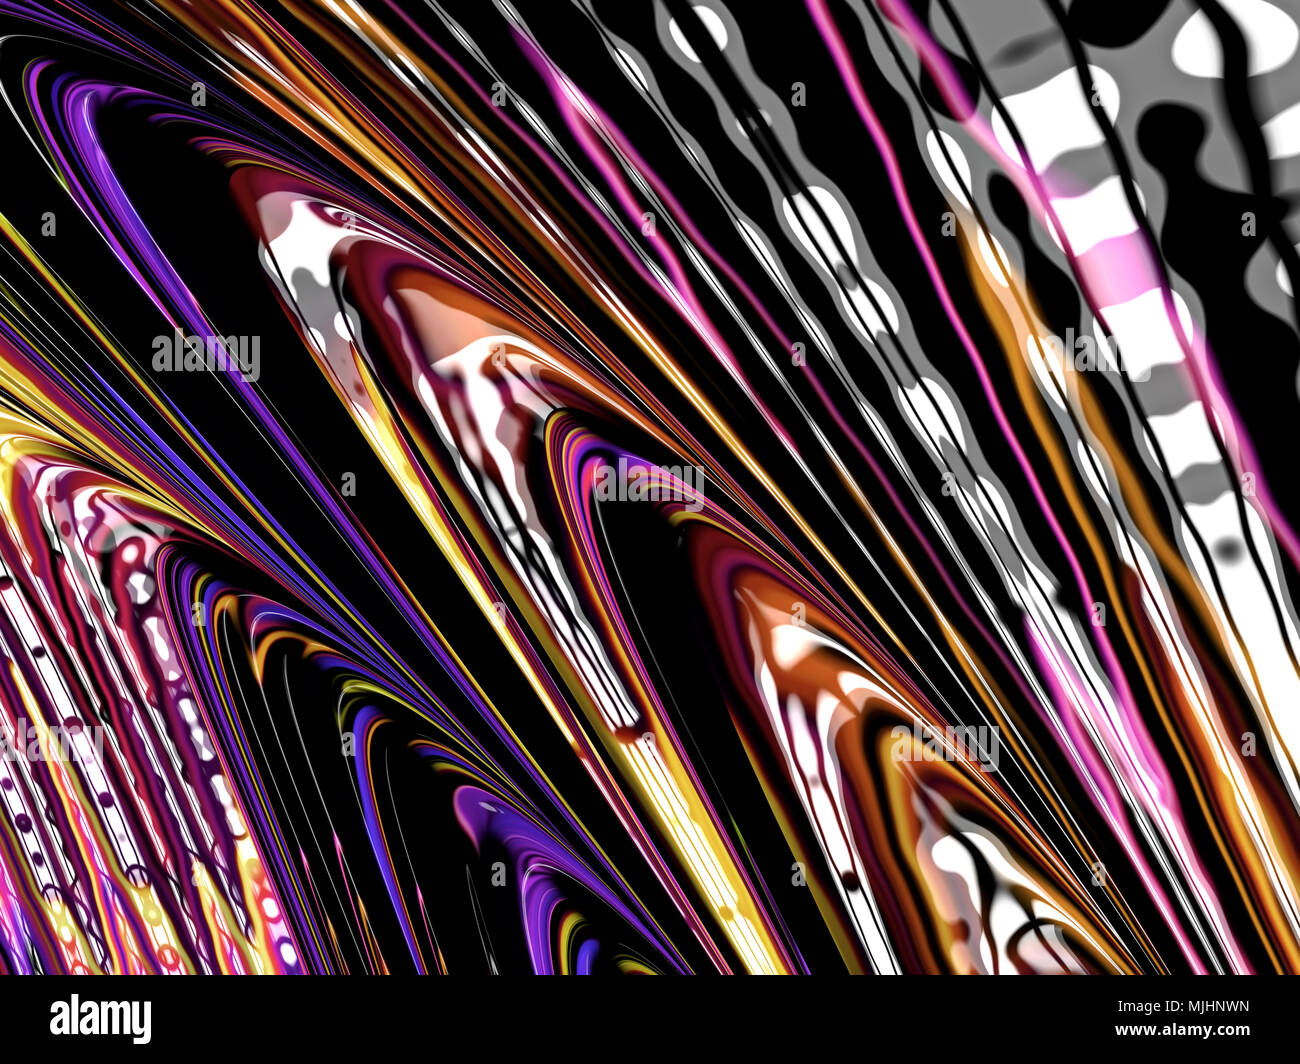 Abstract fractal art fond avec rayures multicolores Banque D'Images